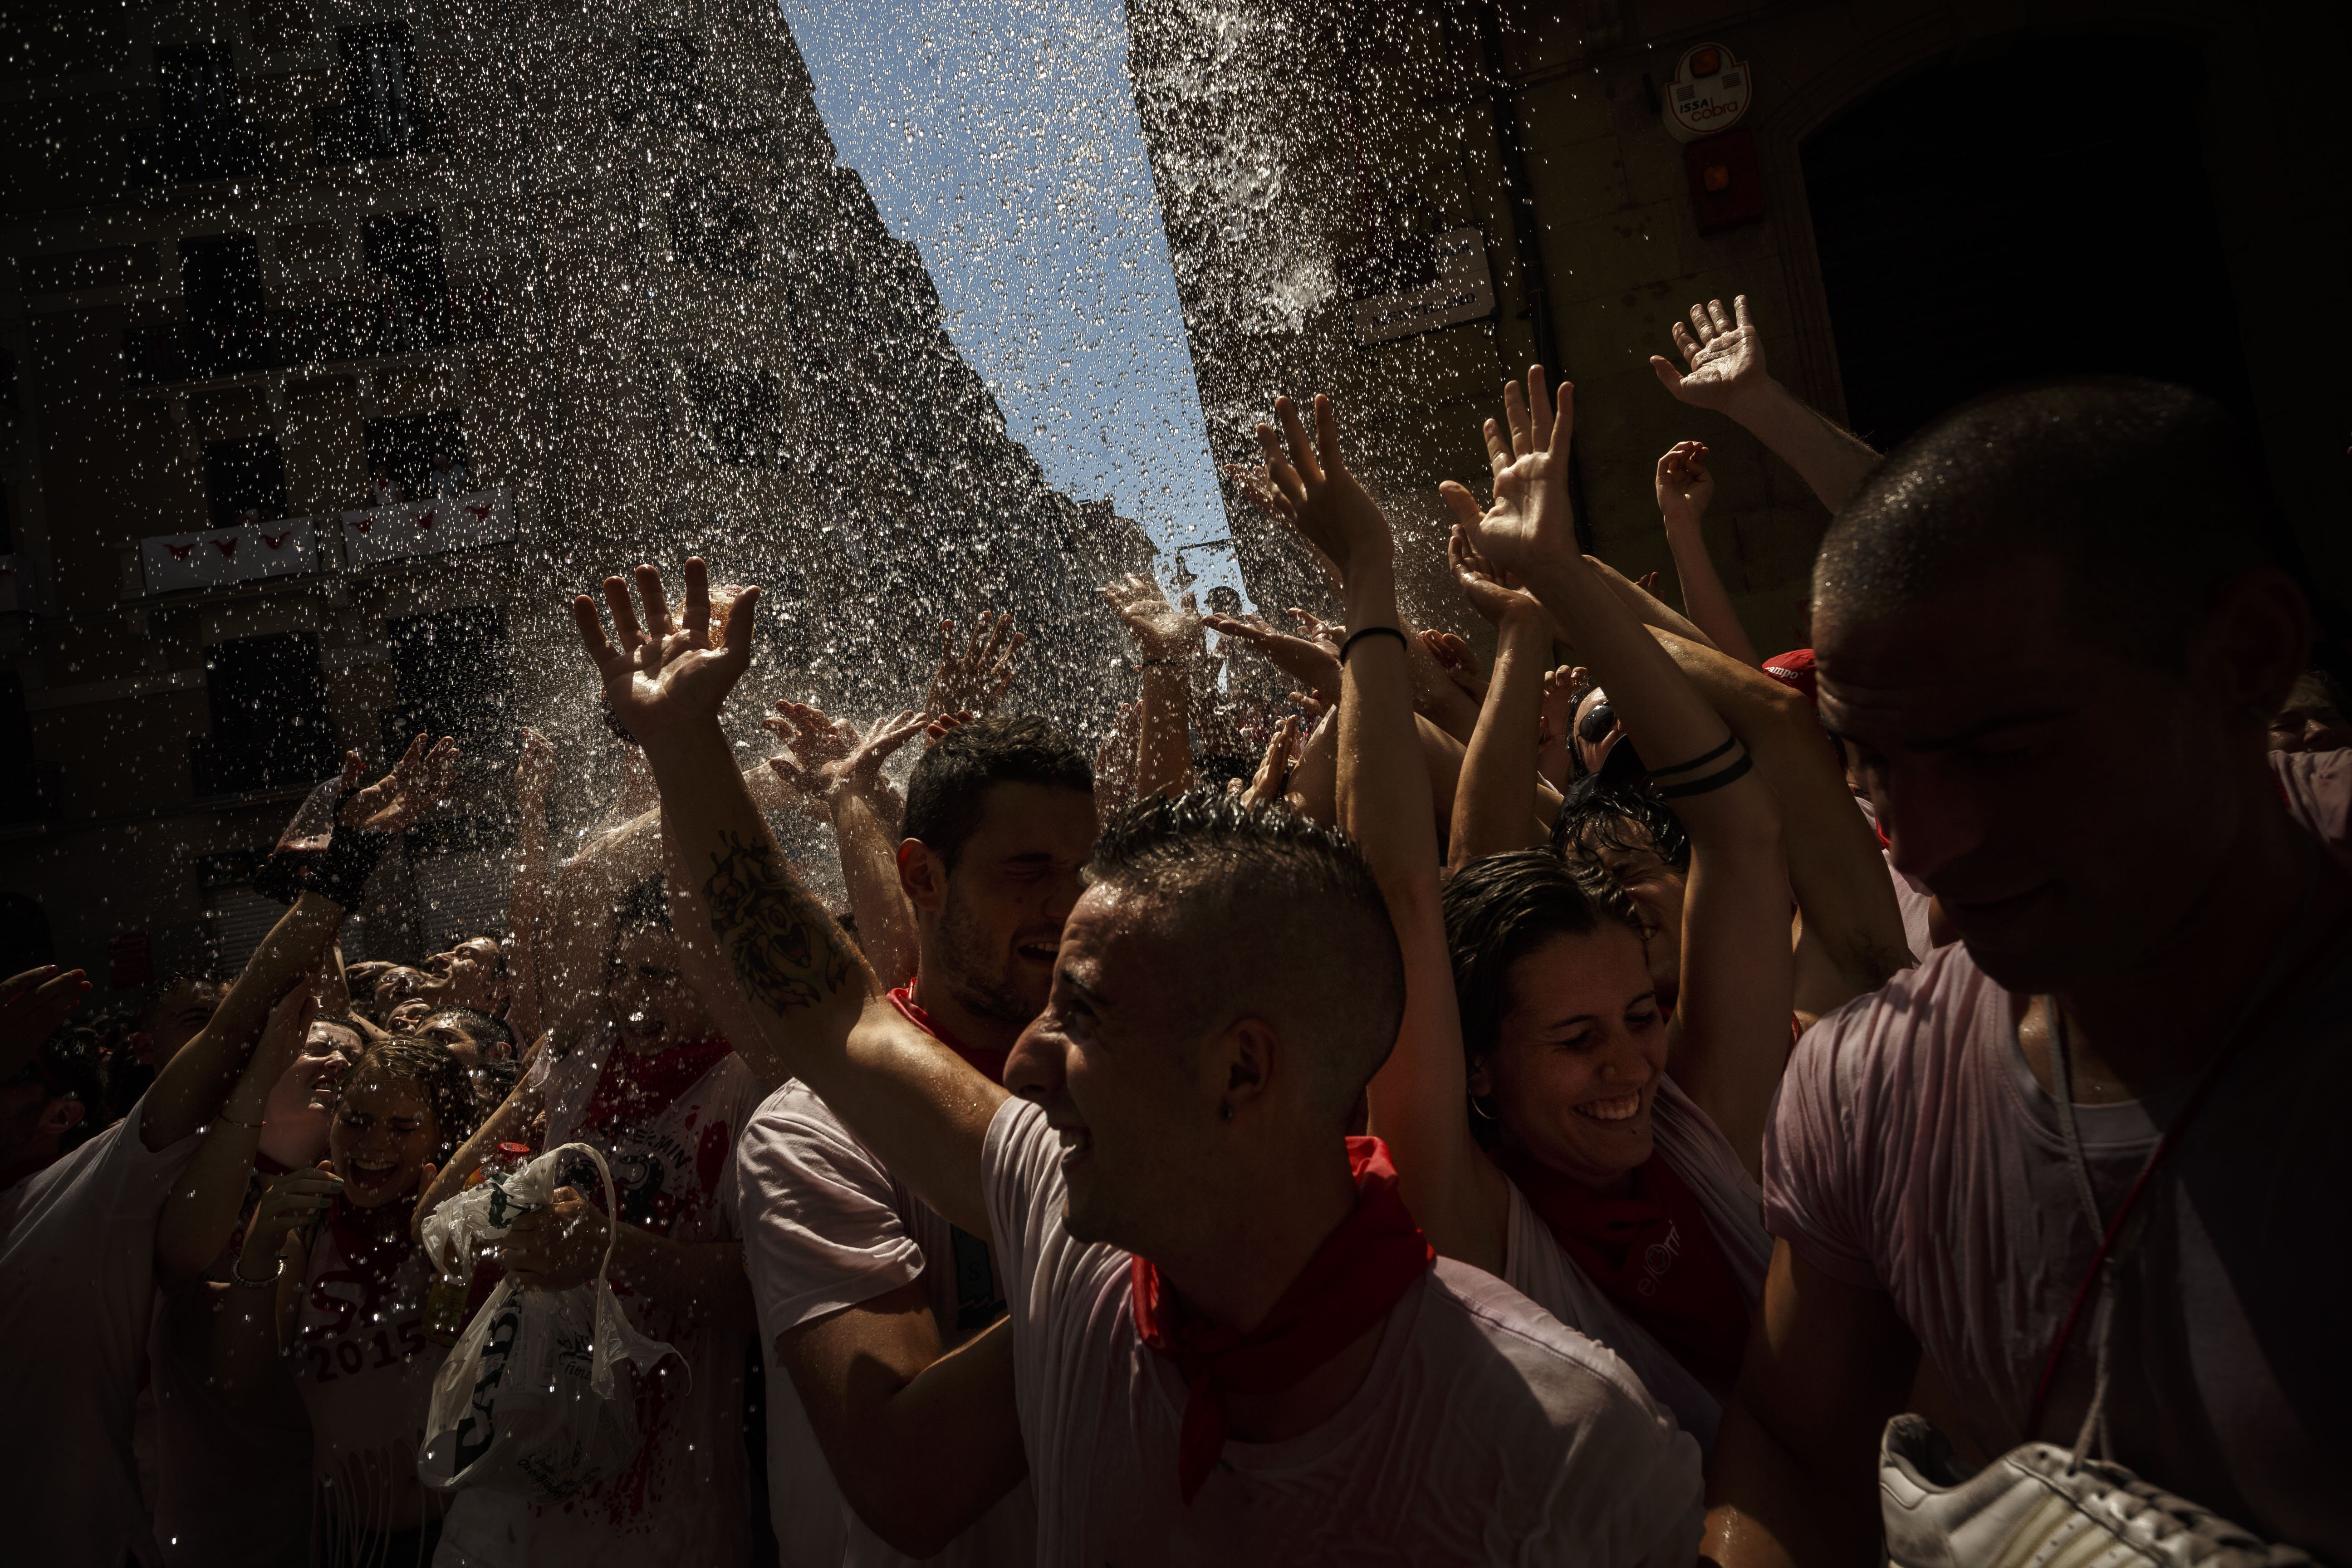 Revelers are sprayed with water as they celebrate during the launch of the 'Chupinazo' rocket, to celebrate the official opening of the 2015 San Fermin fiestas in Pamplona, Spain on July 6, 2015.